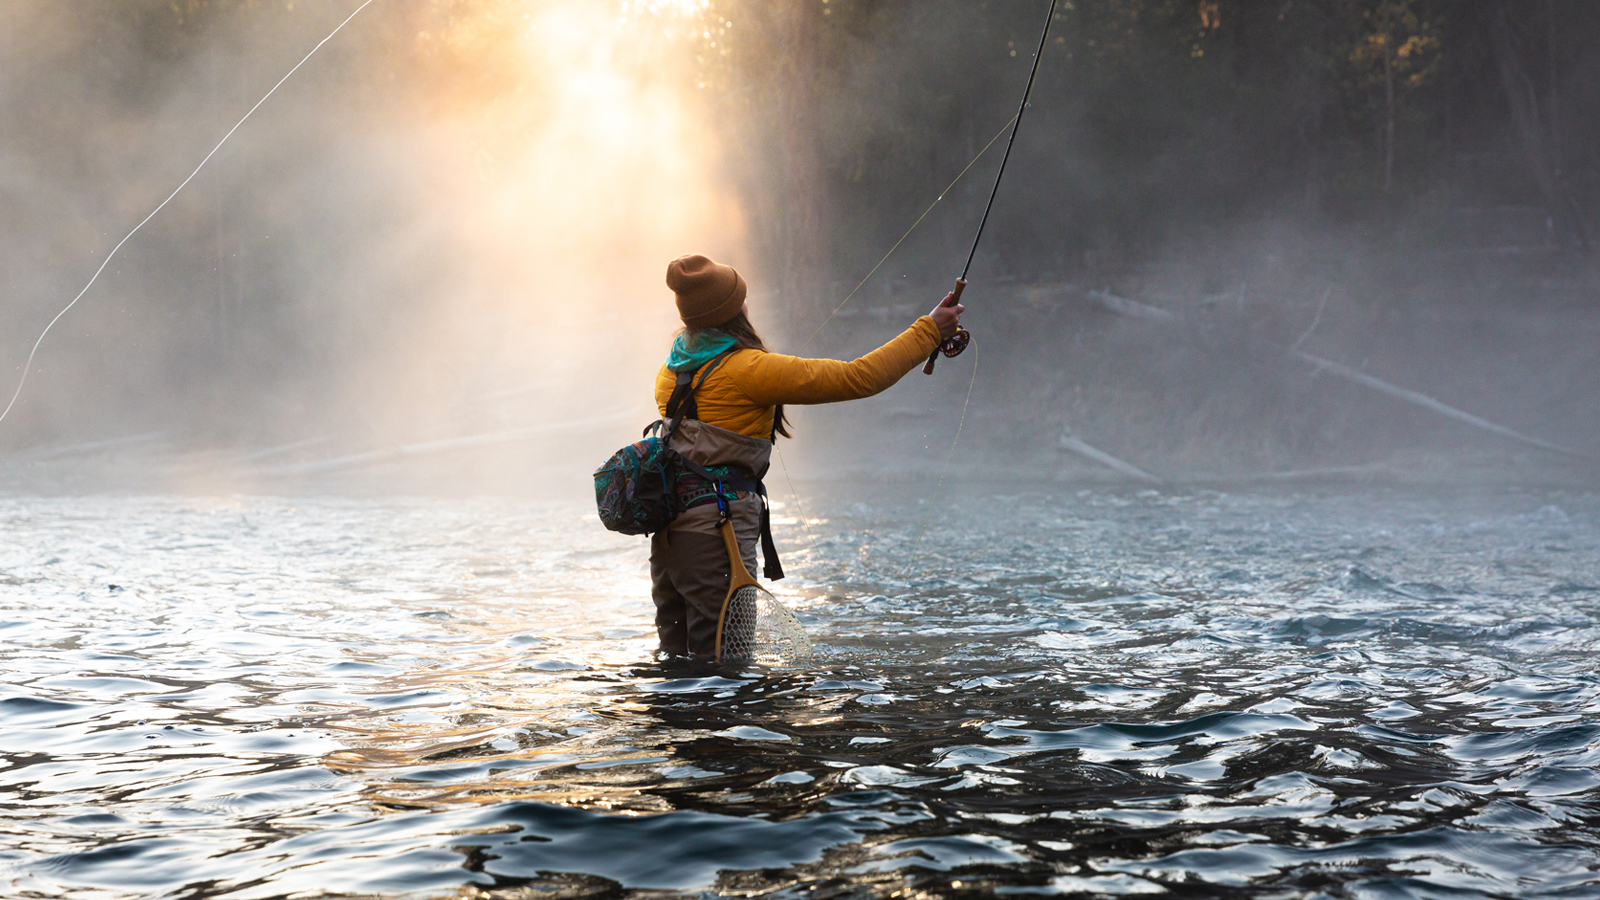 Fly fishing the Fall river near Bend, Oregon